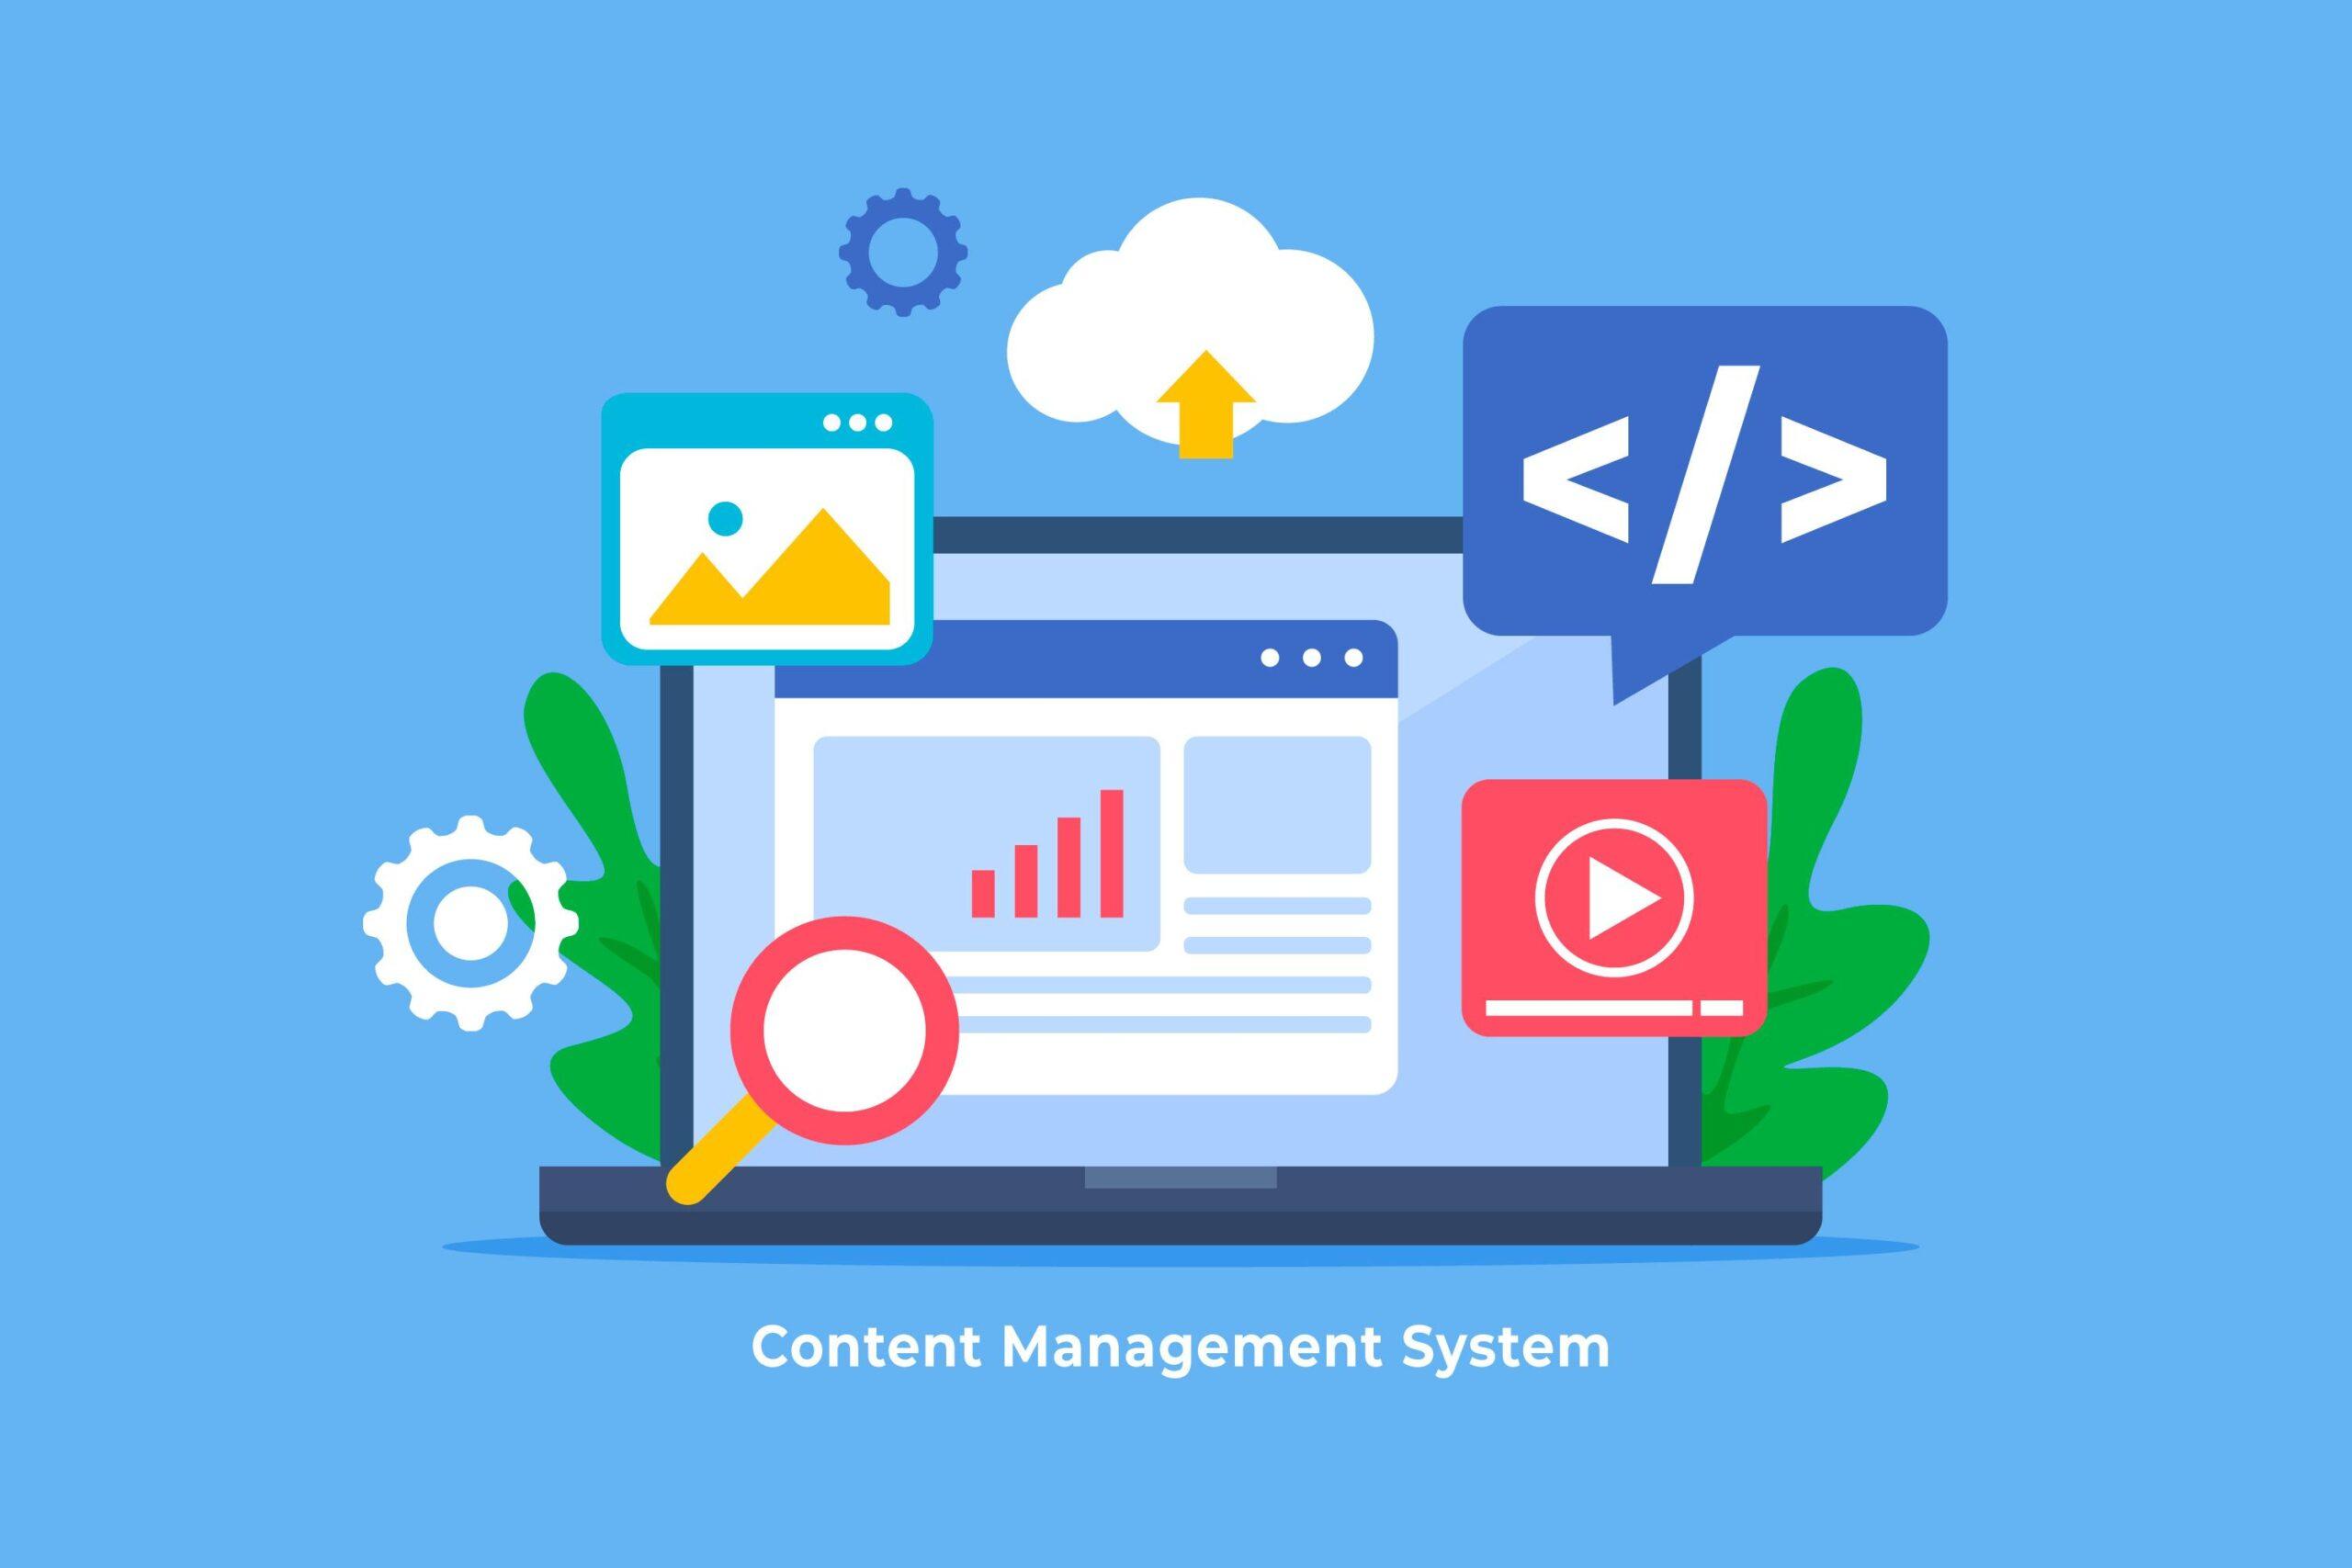 HOW DO YOU CHOOSE THE BEST CONTENT MANAGEMENT SYSTEM?